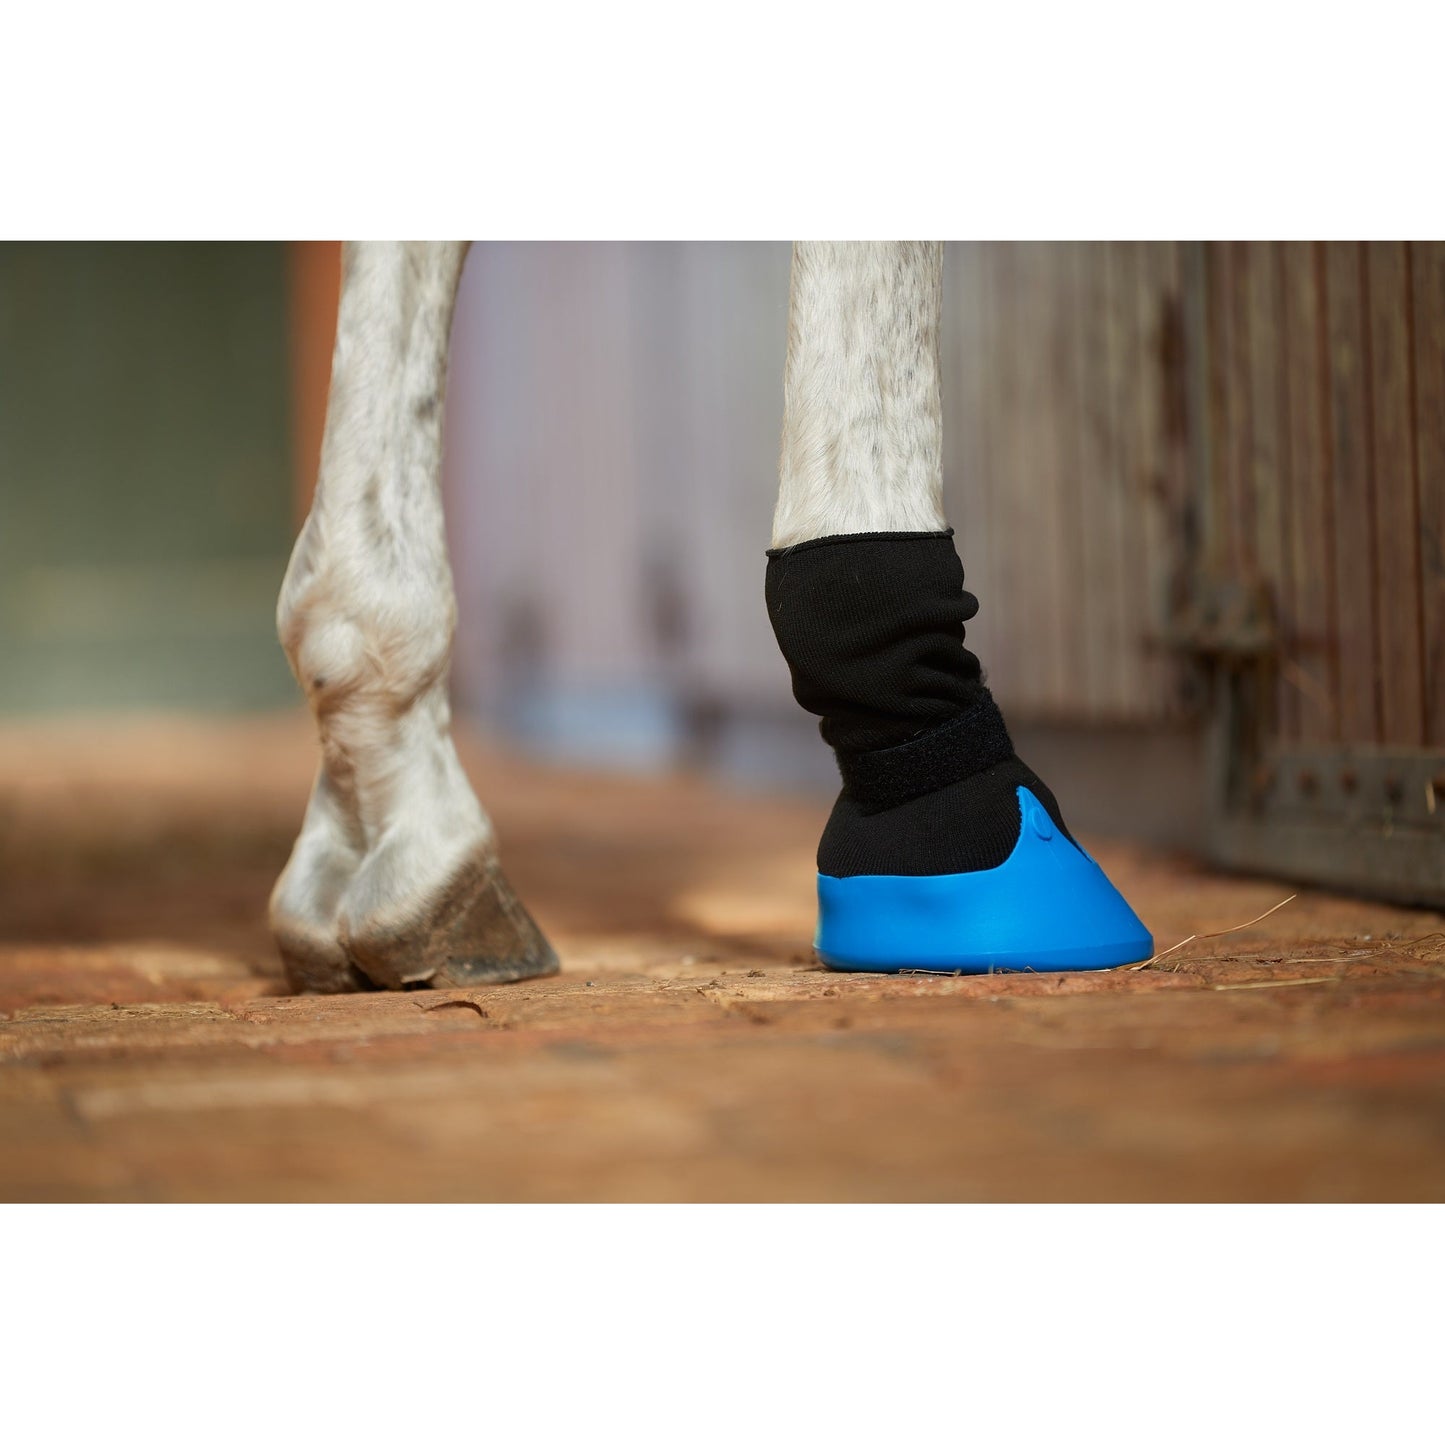 Close-up of a horse's legs, one wearing a black bandage and a blue protective boot, standing on a brick surface.